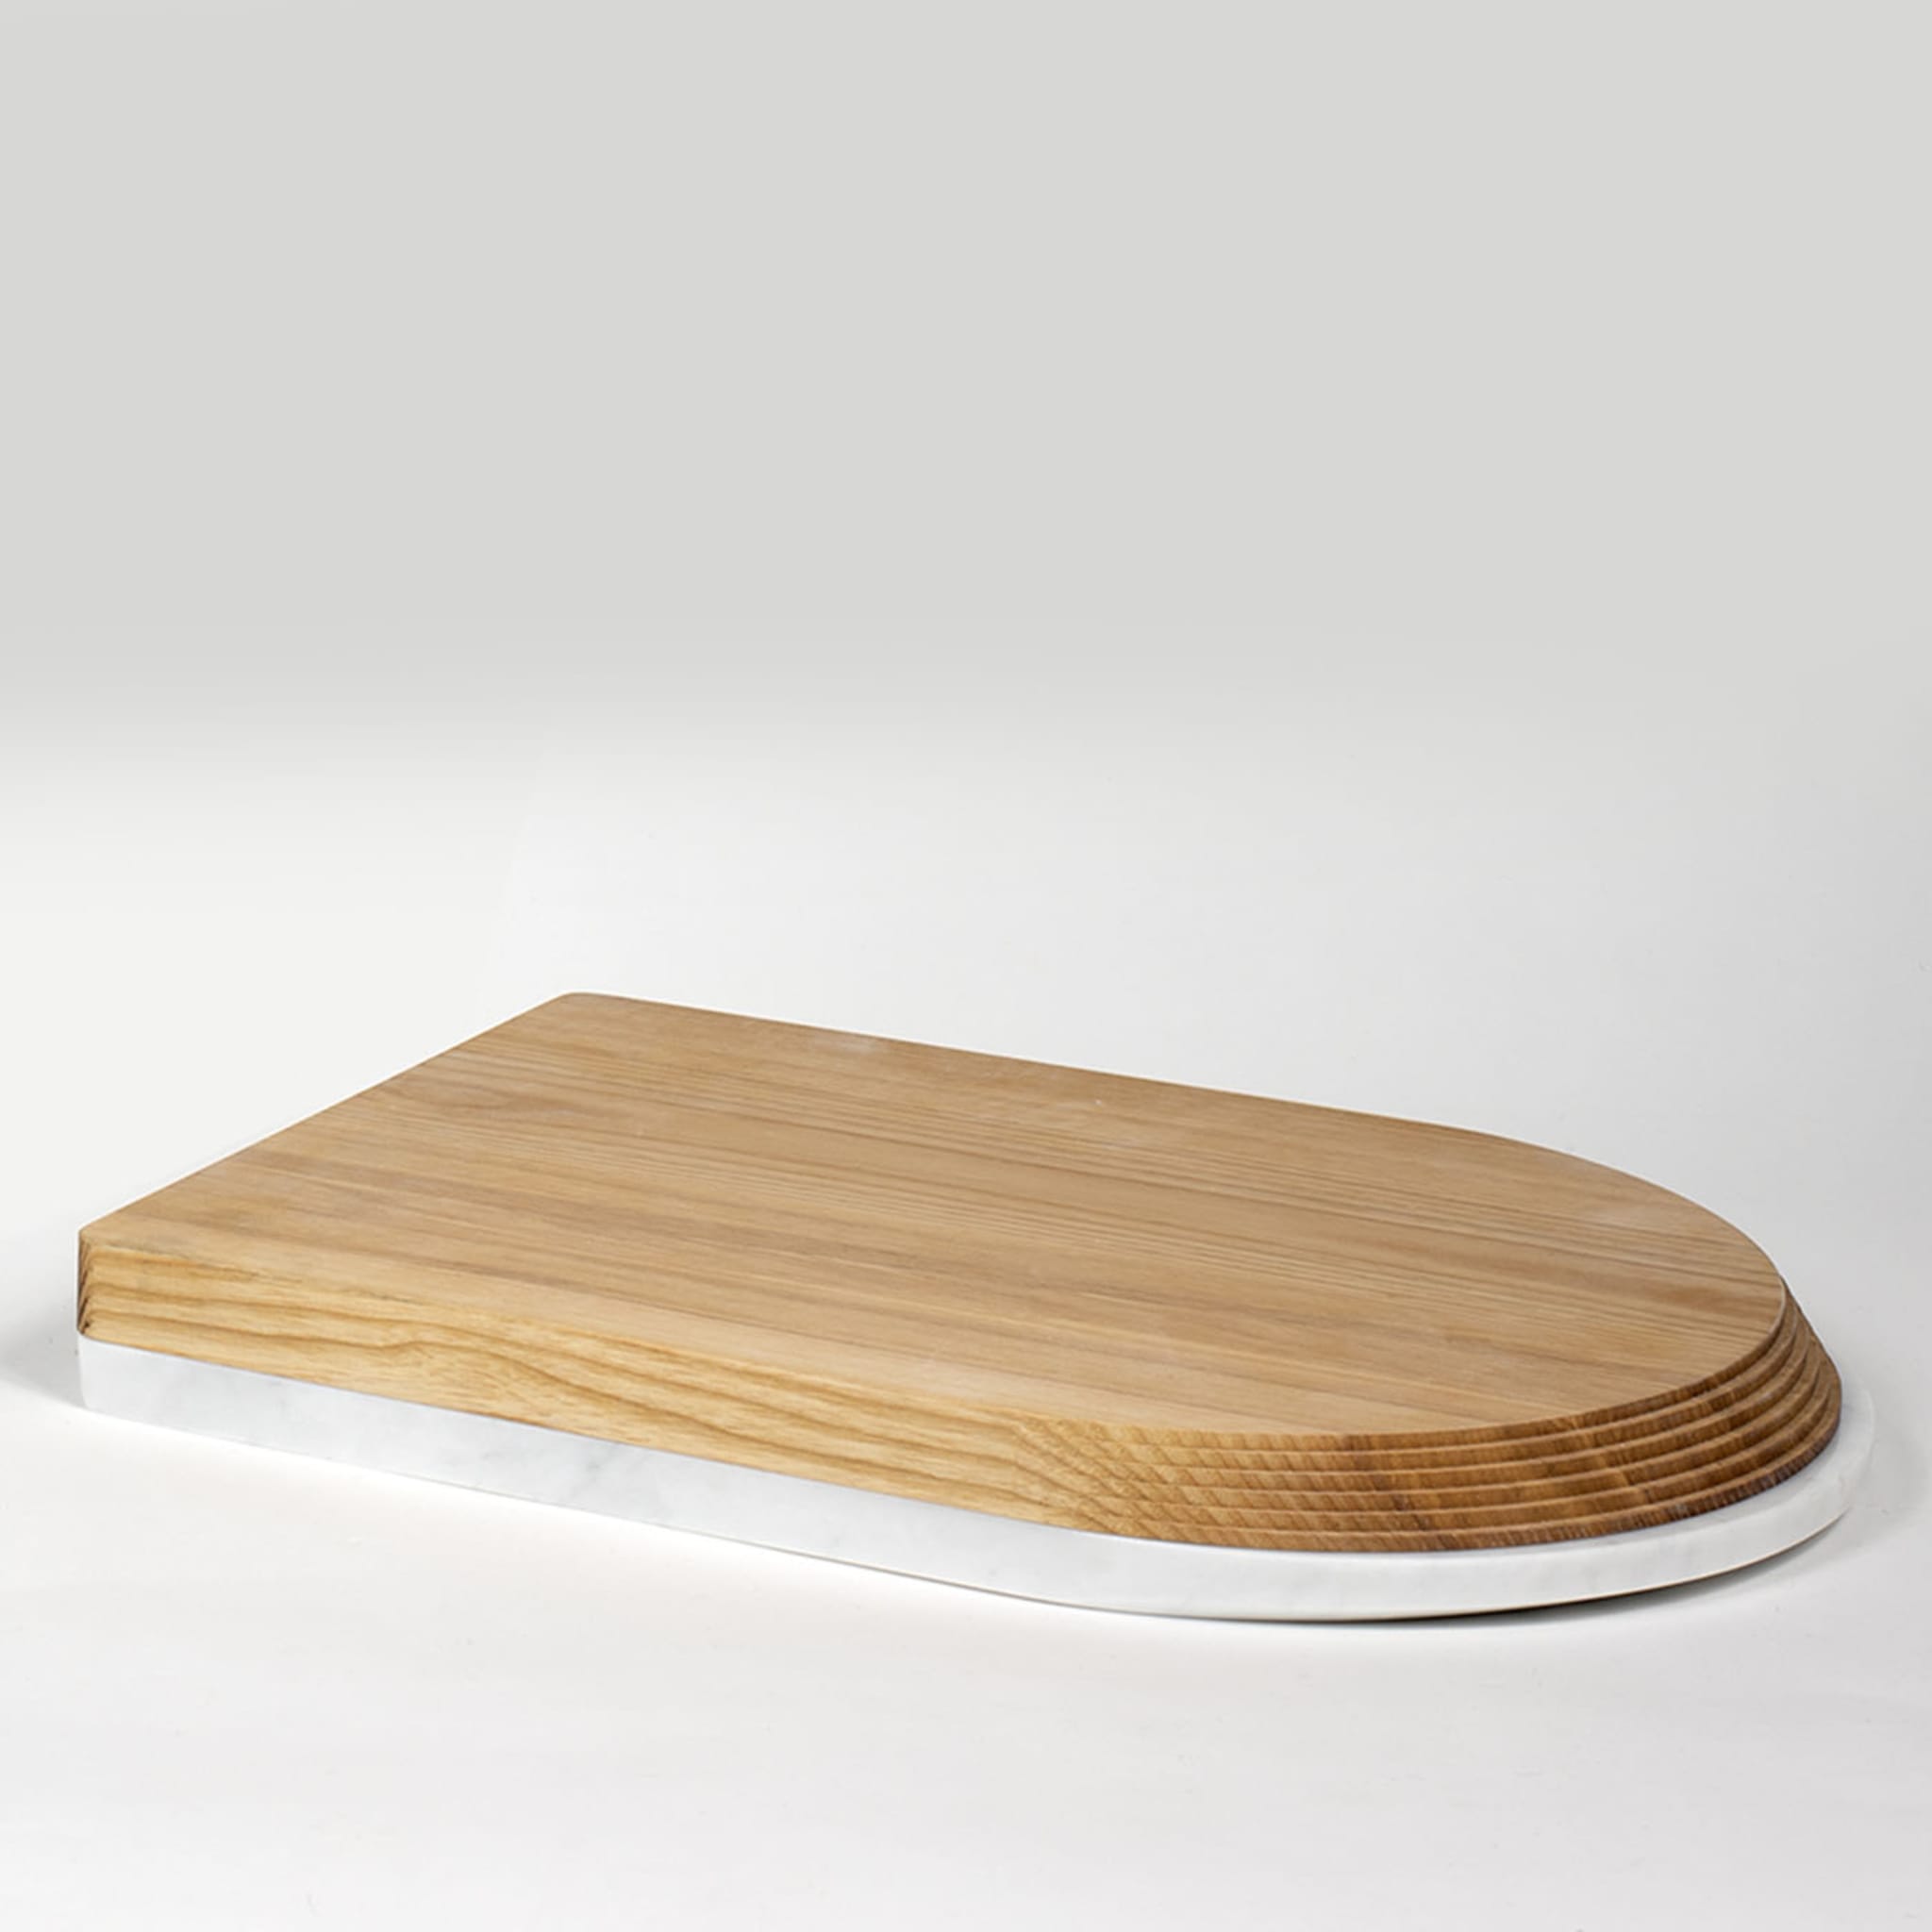 Tagliere Wood and Marble Cutting Board - Alternative view 3